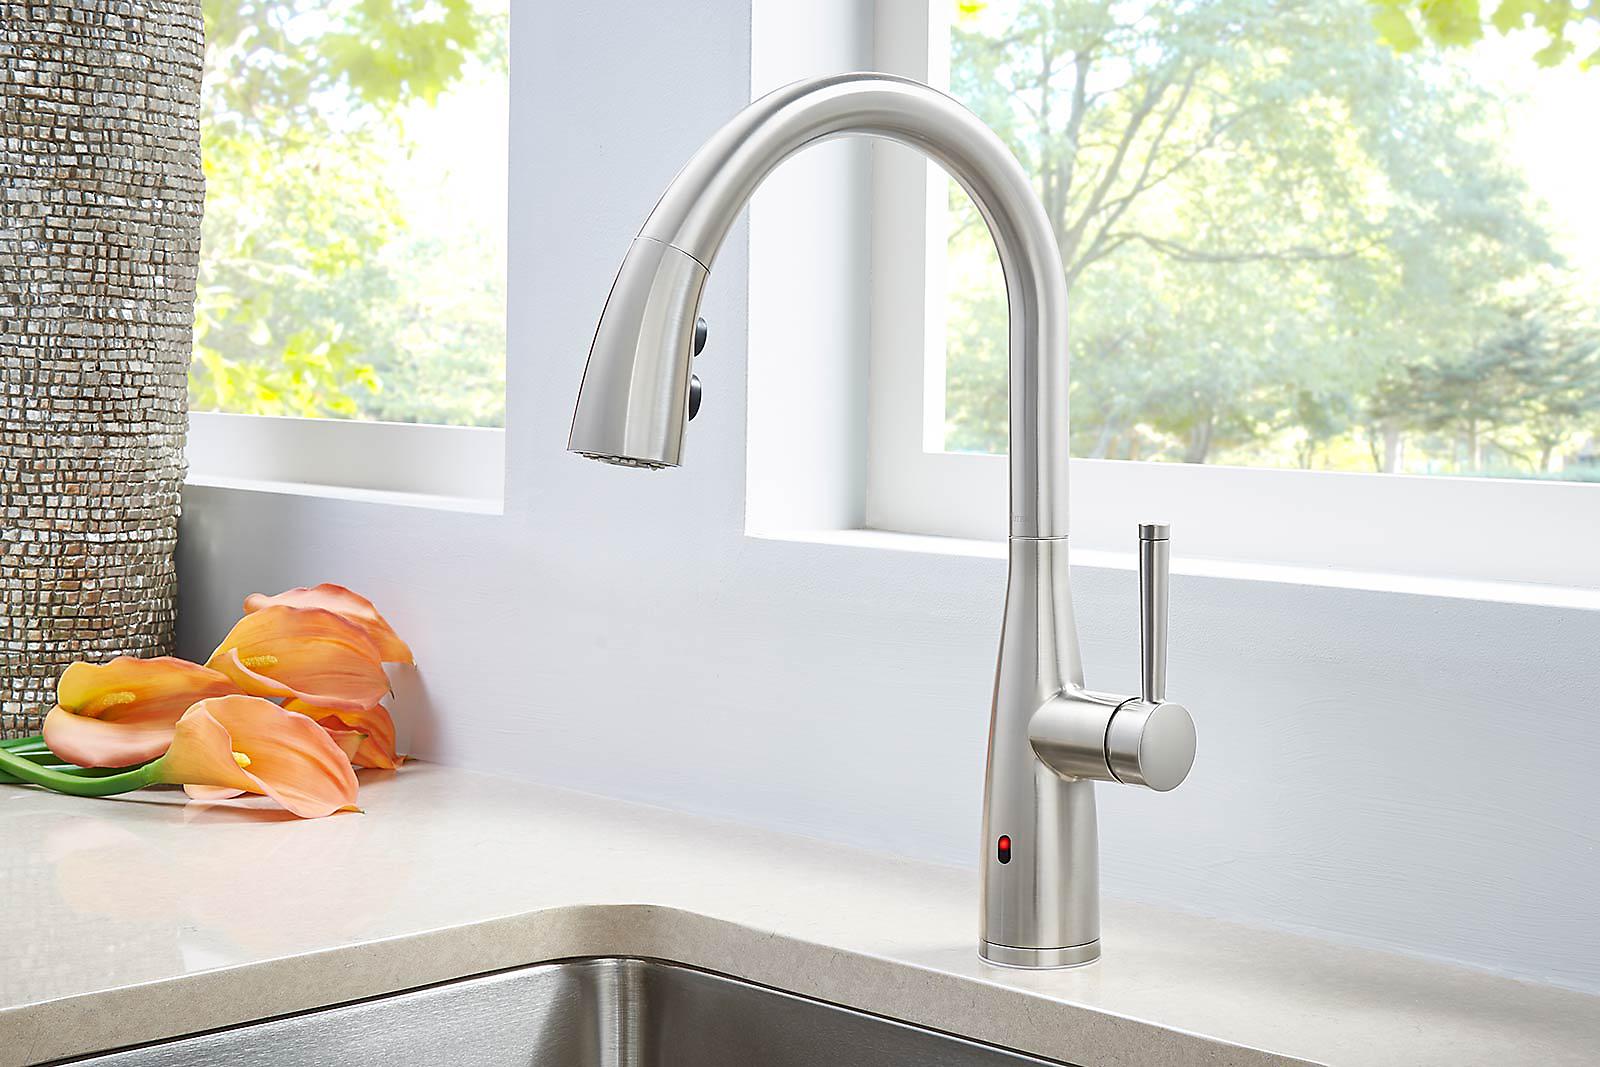 Touchless Kitchen Faucet Technology is amazing